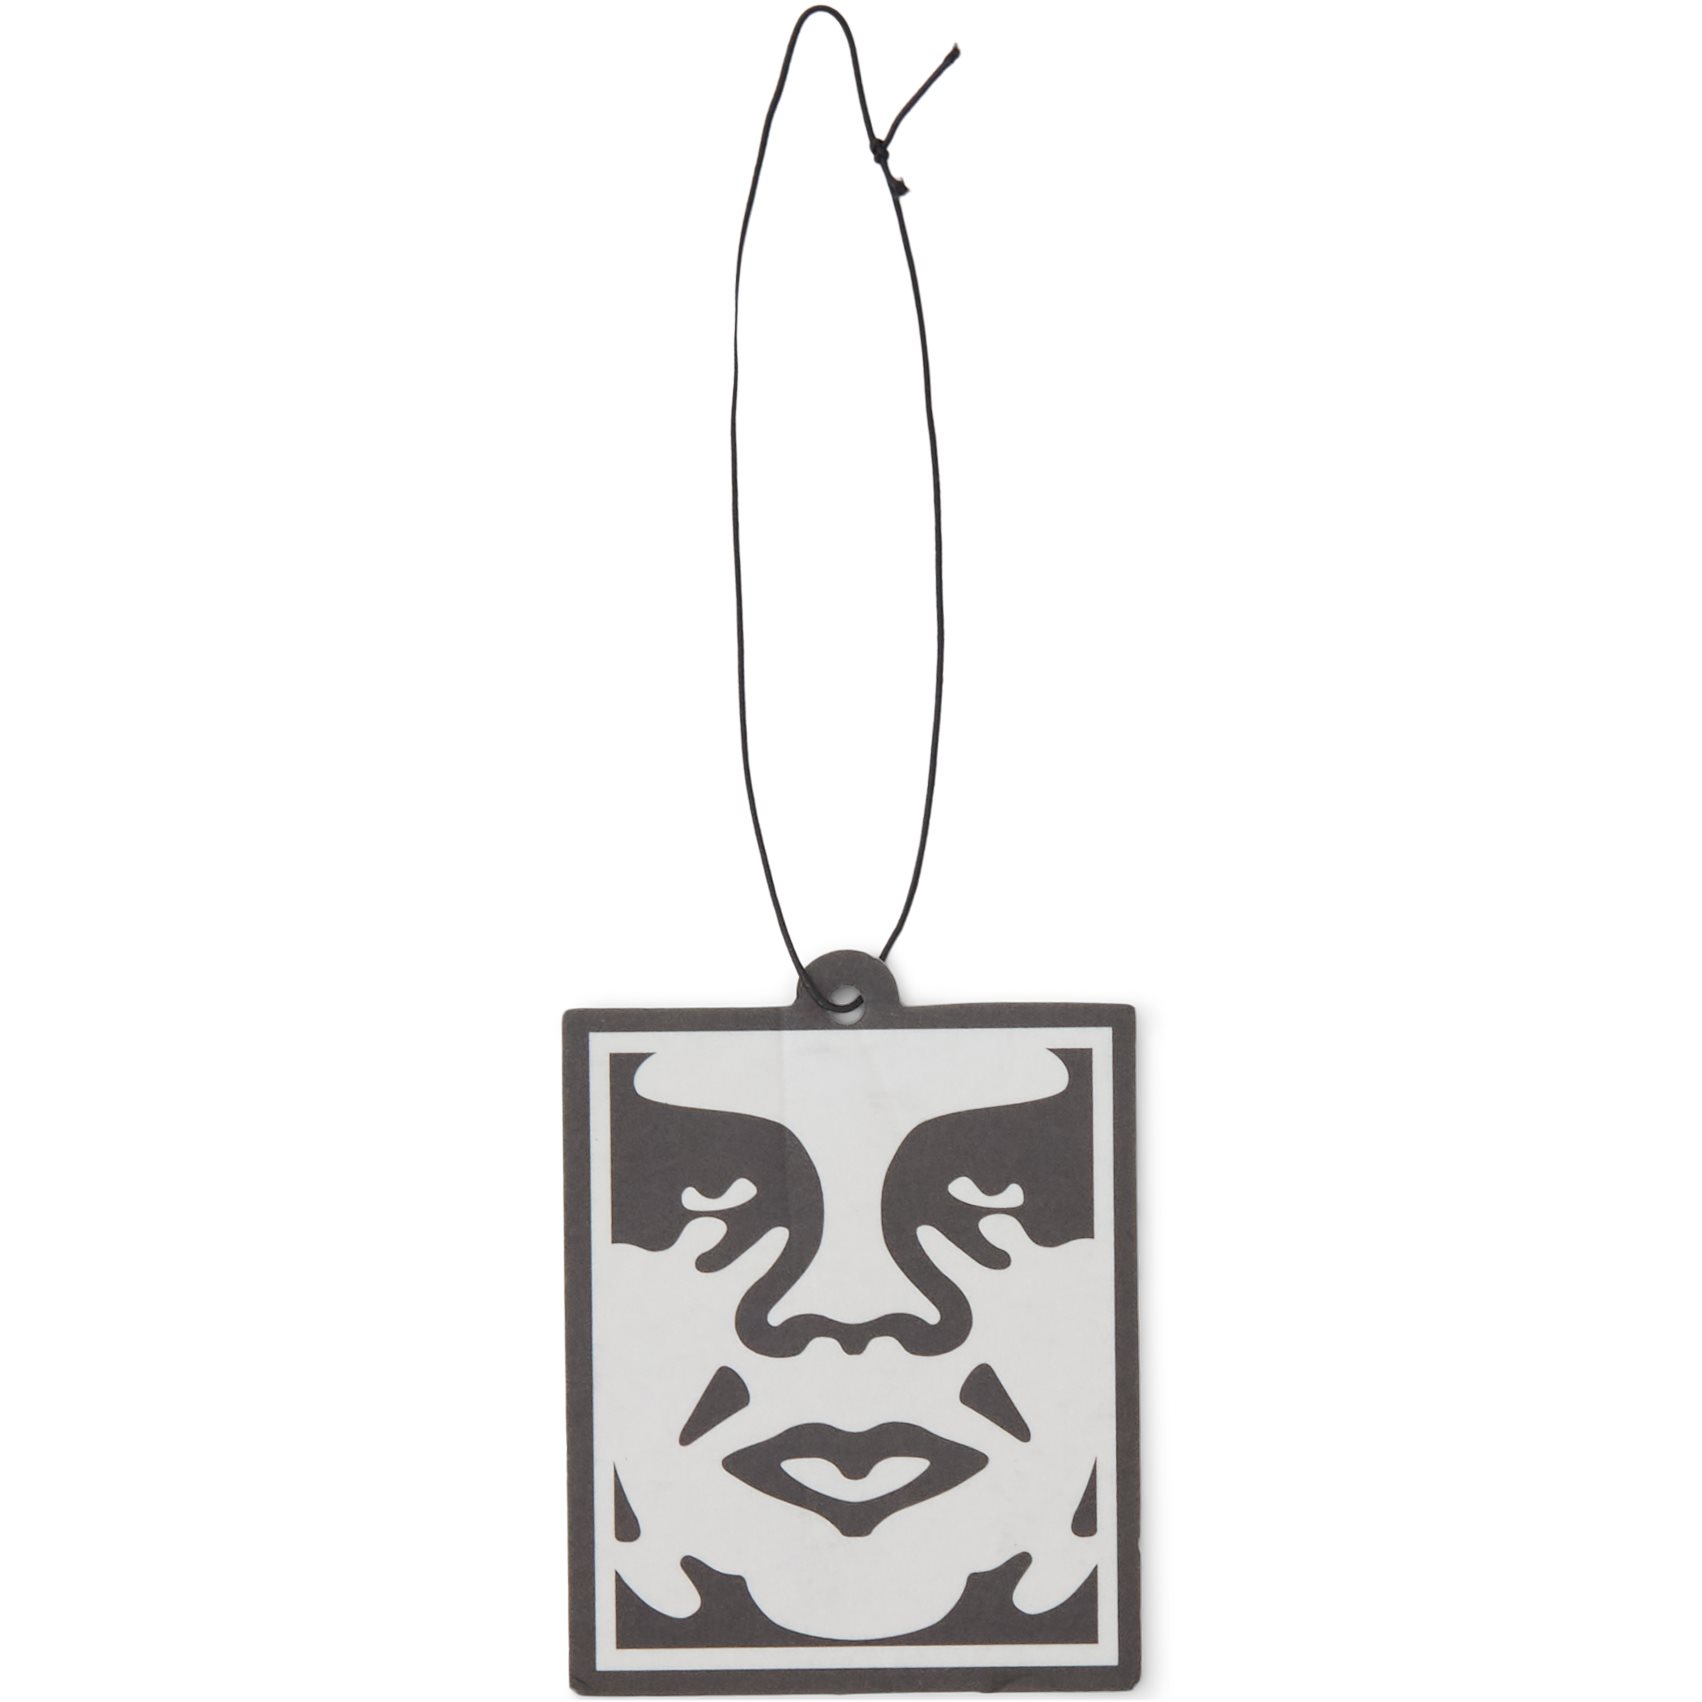 Obey Accessories OBEY ICON AIR FRESHENER 100680003 Sort